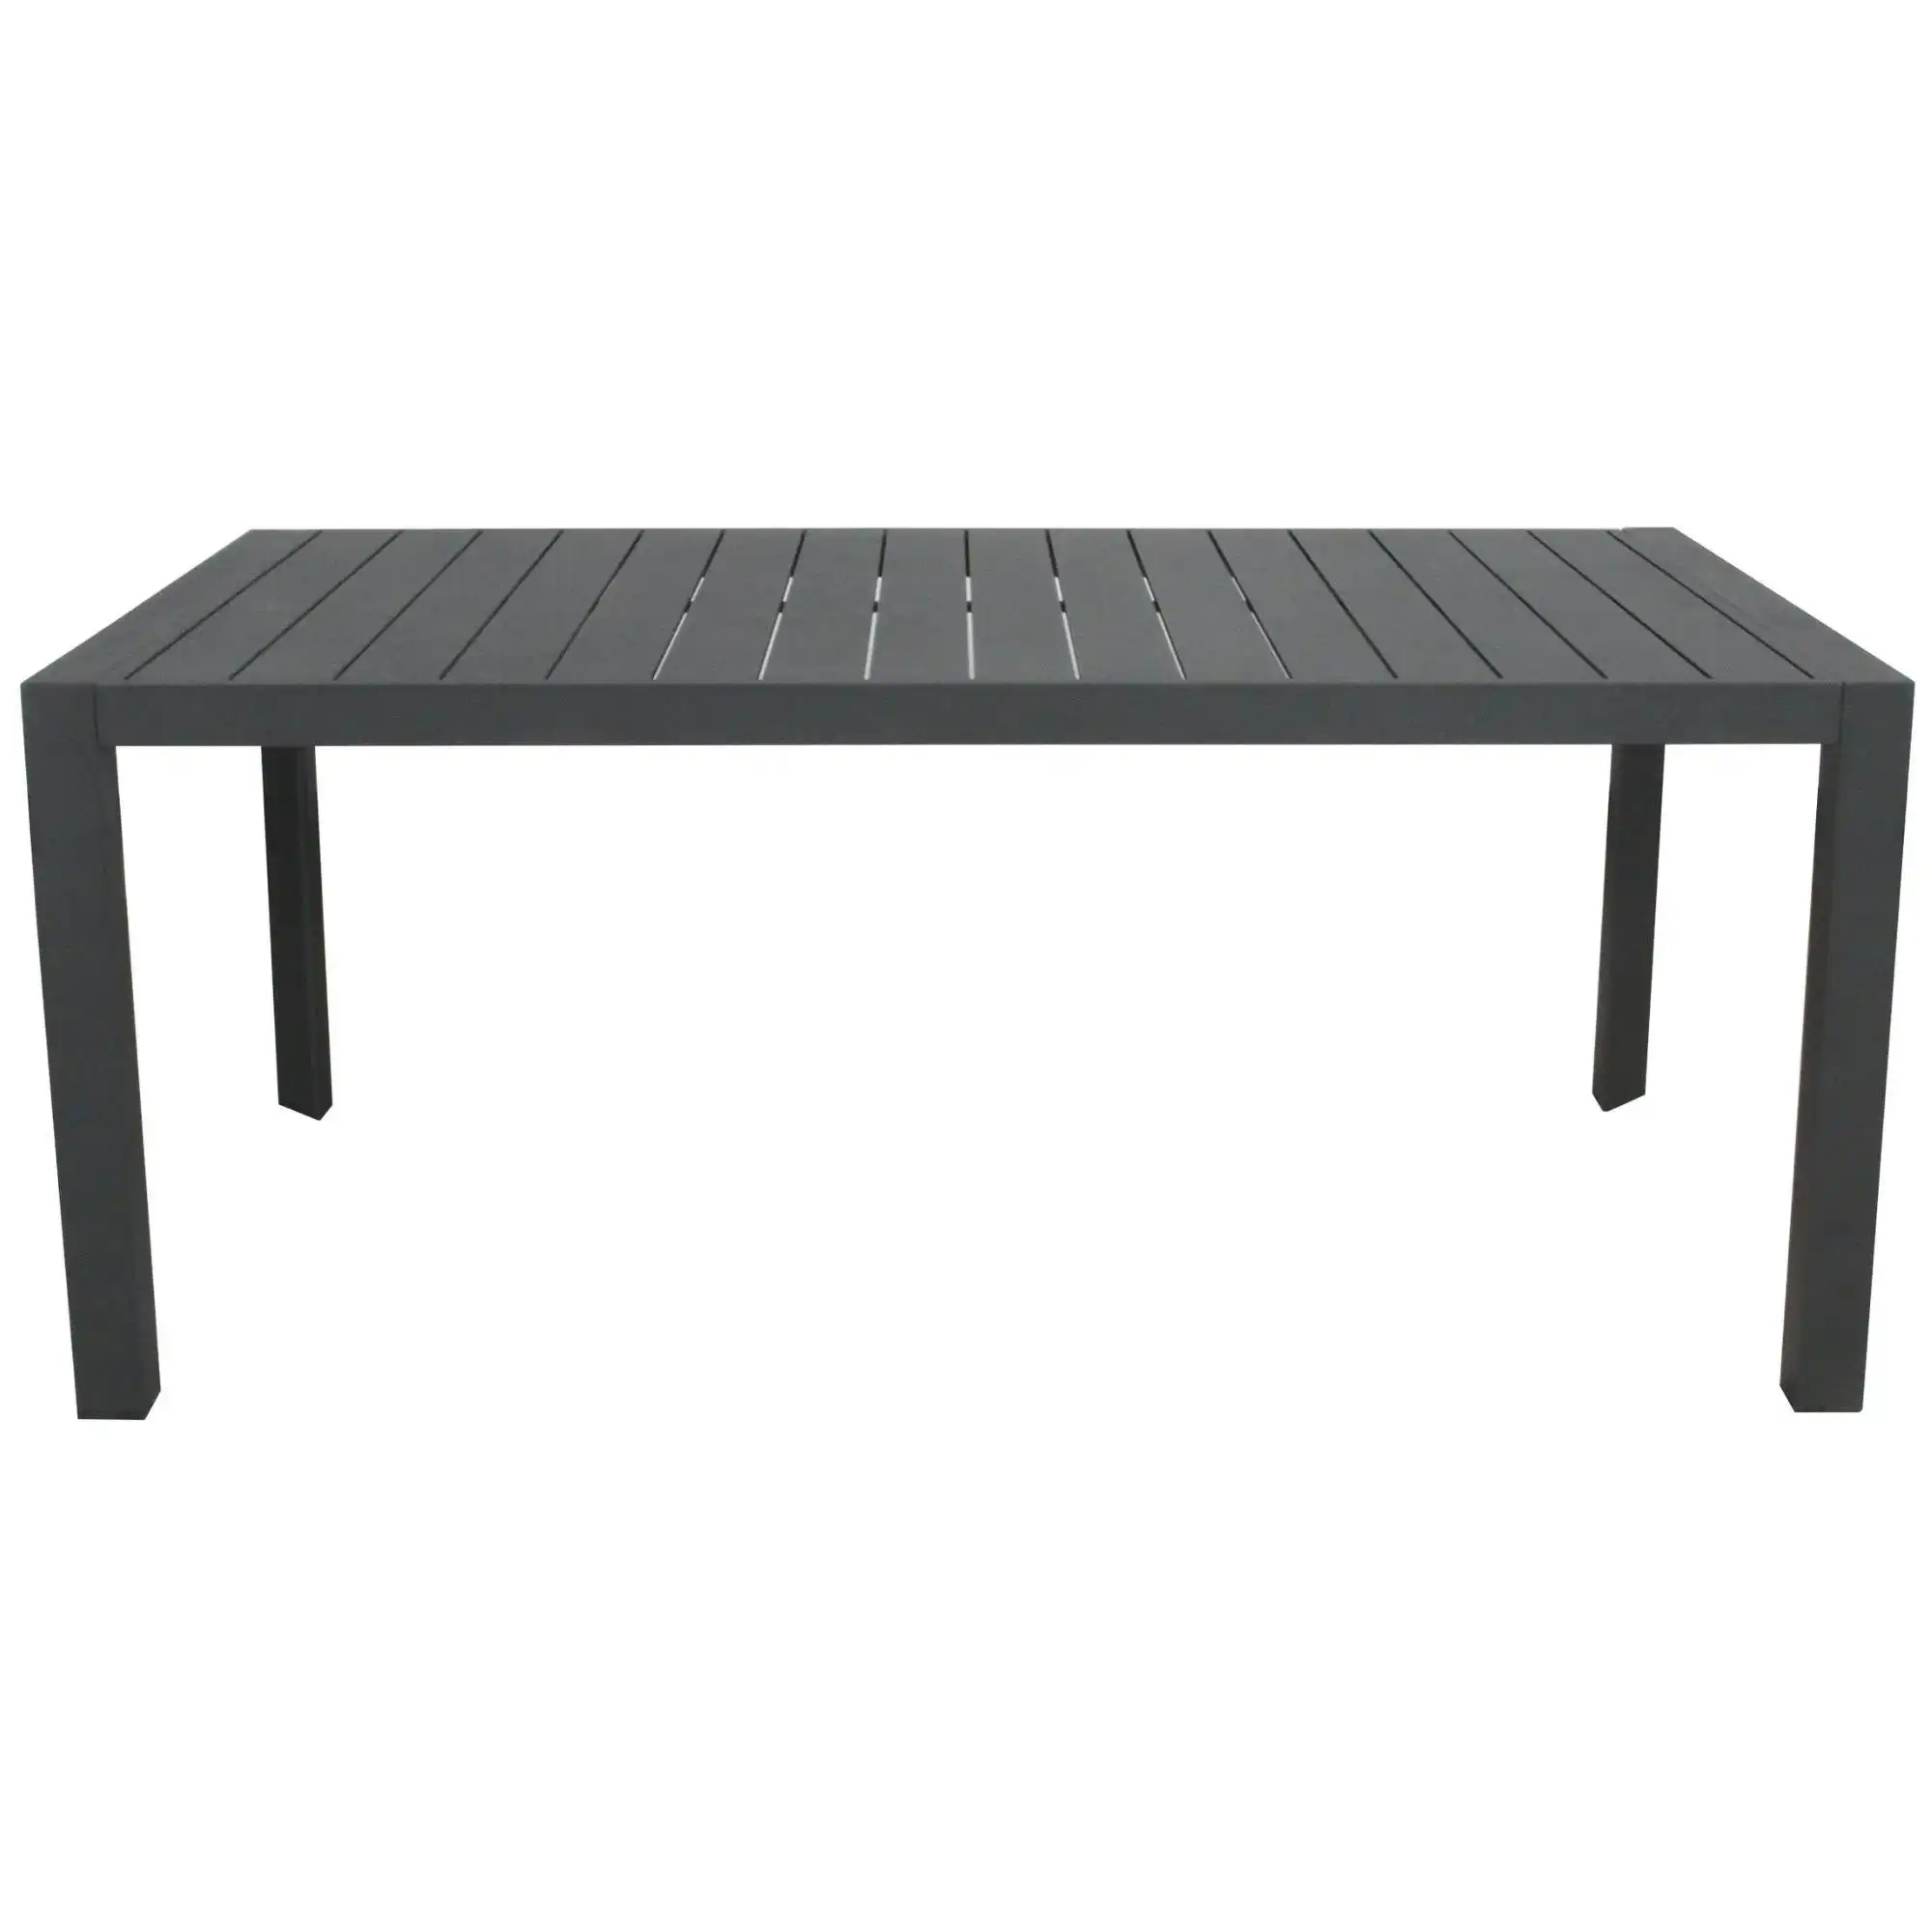 Iberia 178cm Outdoor Dining Table